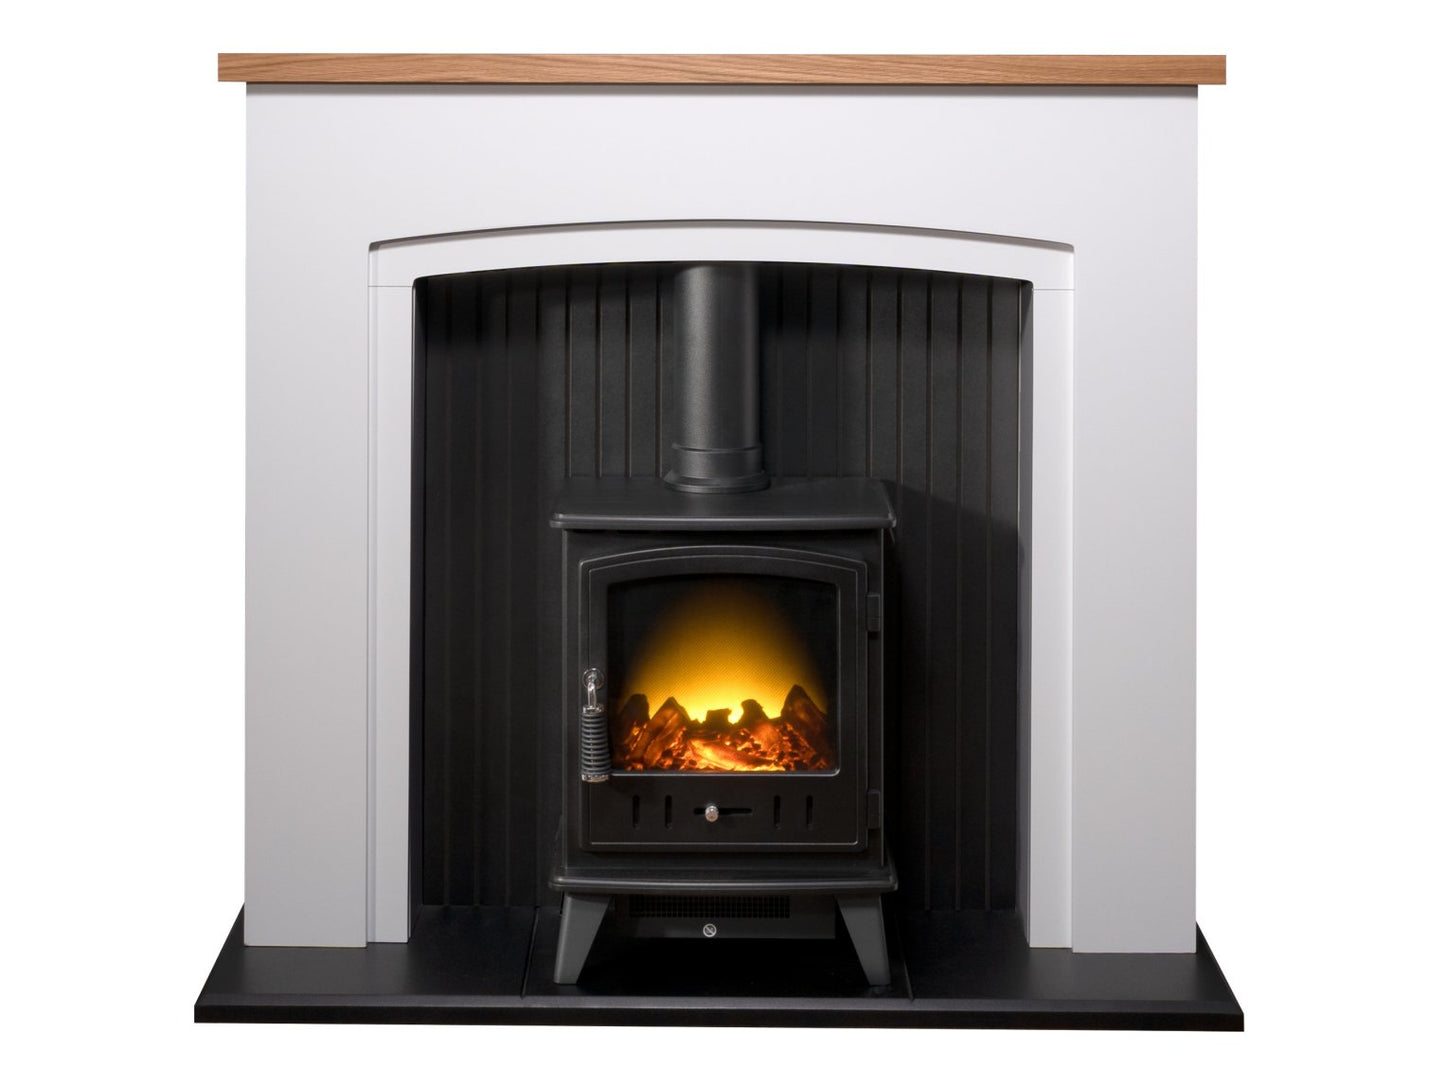 Adam Siena Stove Suite in Pure White with Aviemore Electric Stove in Black Enamel 48 Inch